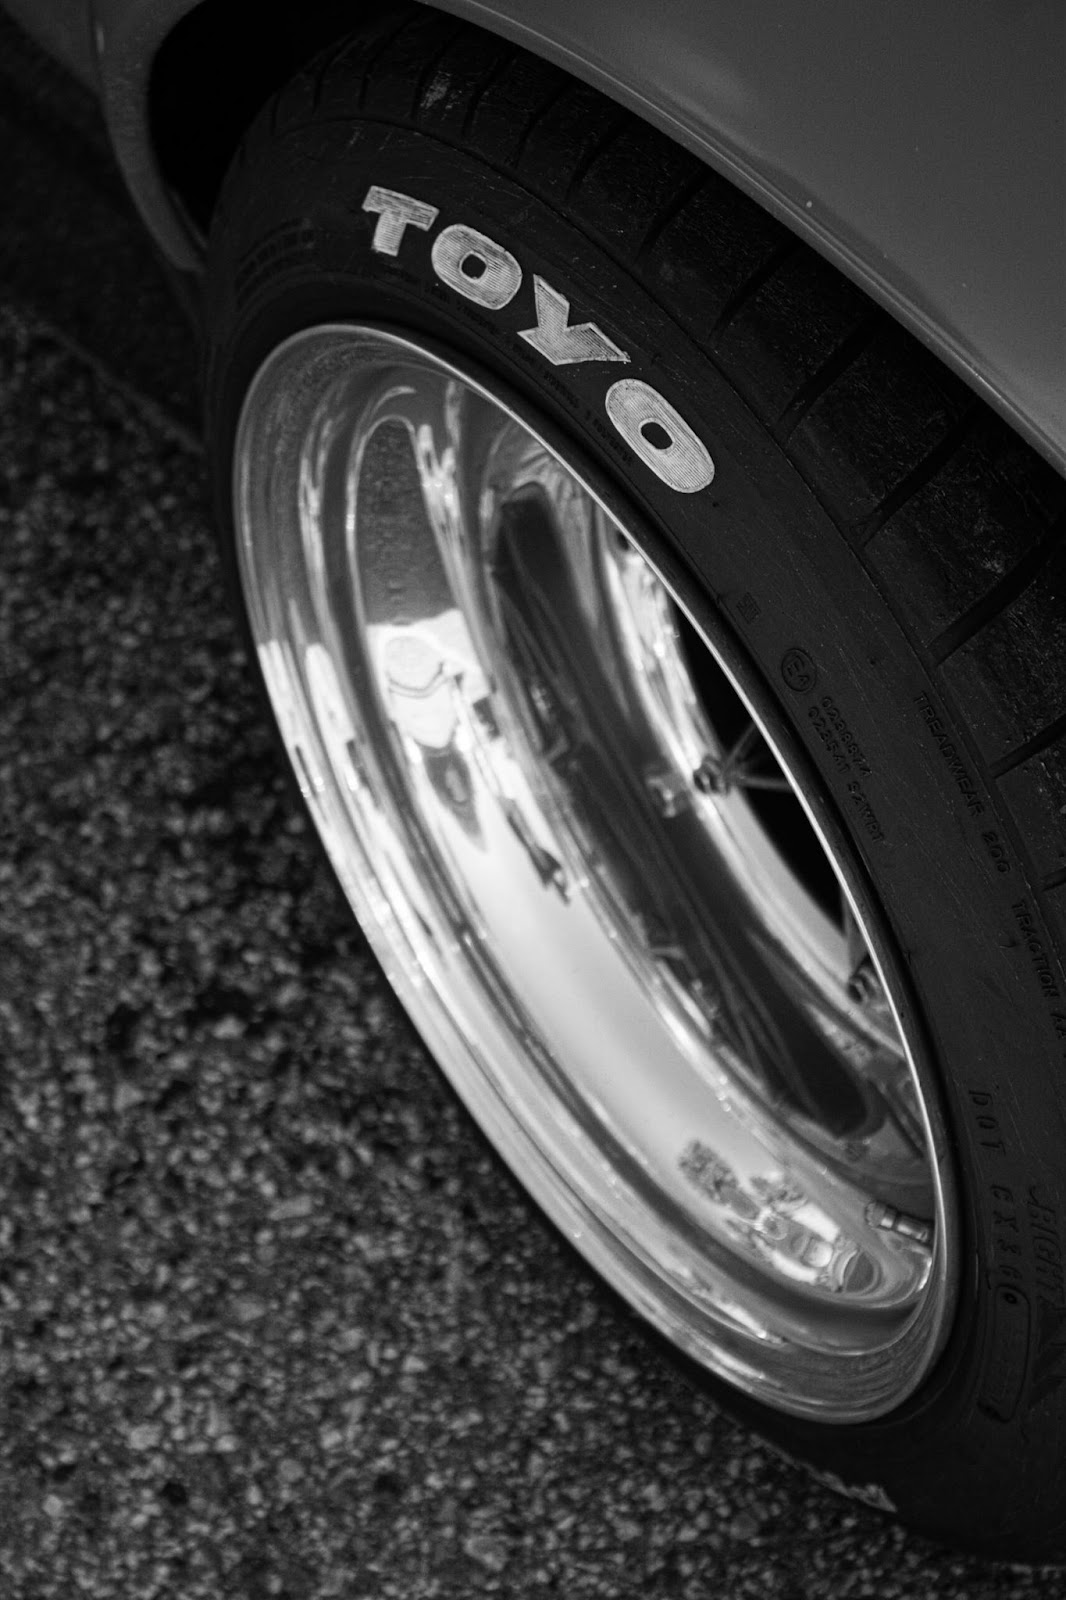 A close-up picture of a stylish Toyo tire